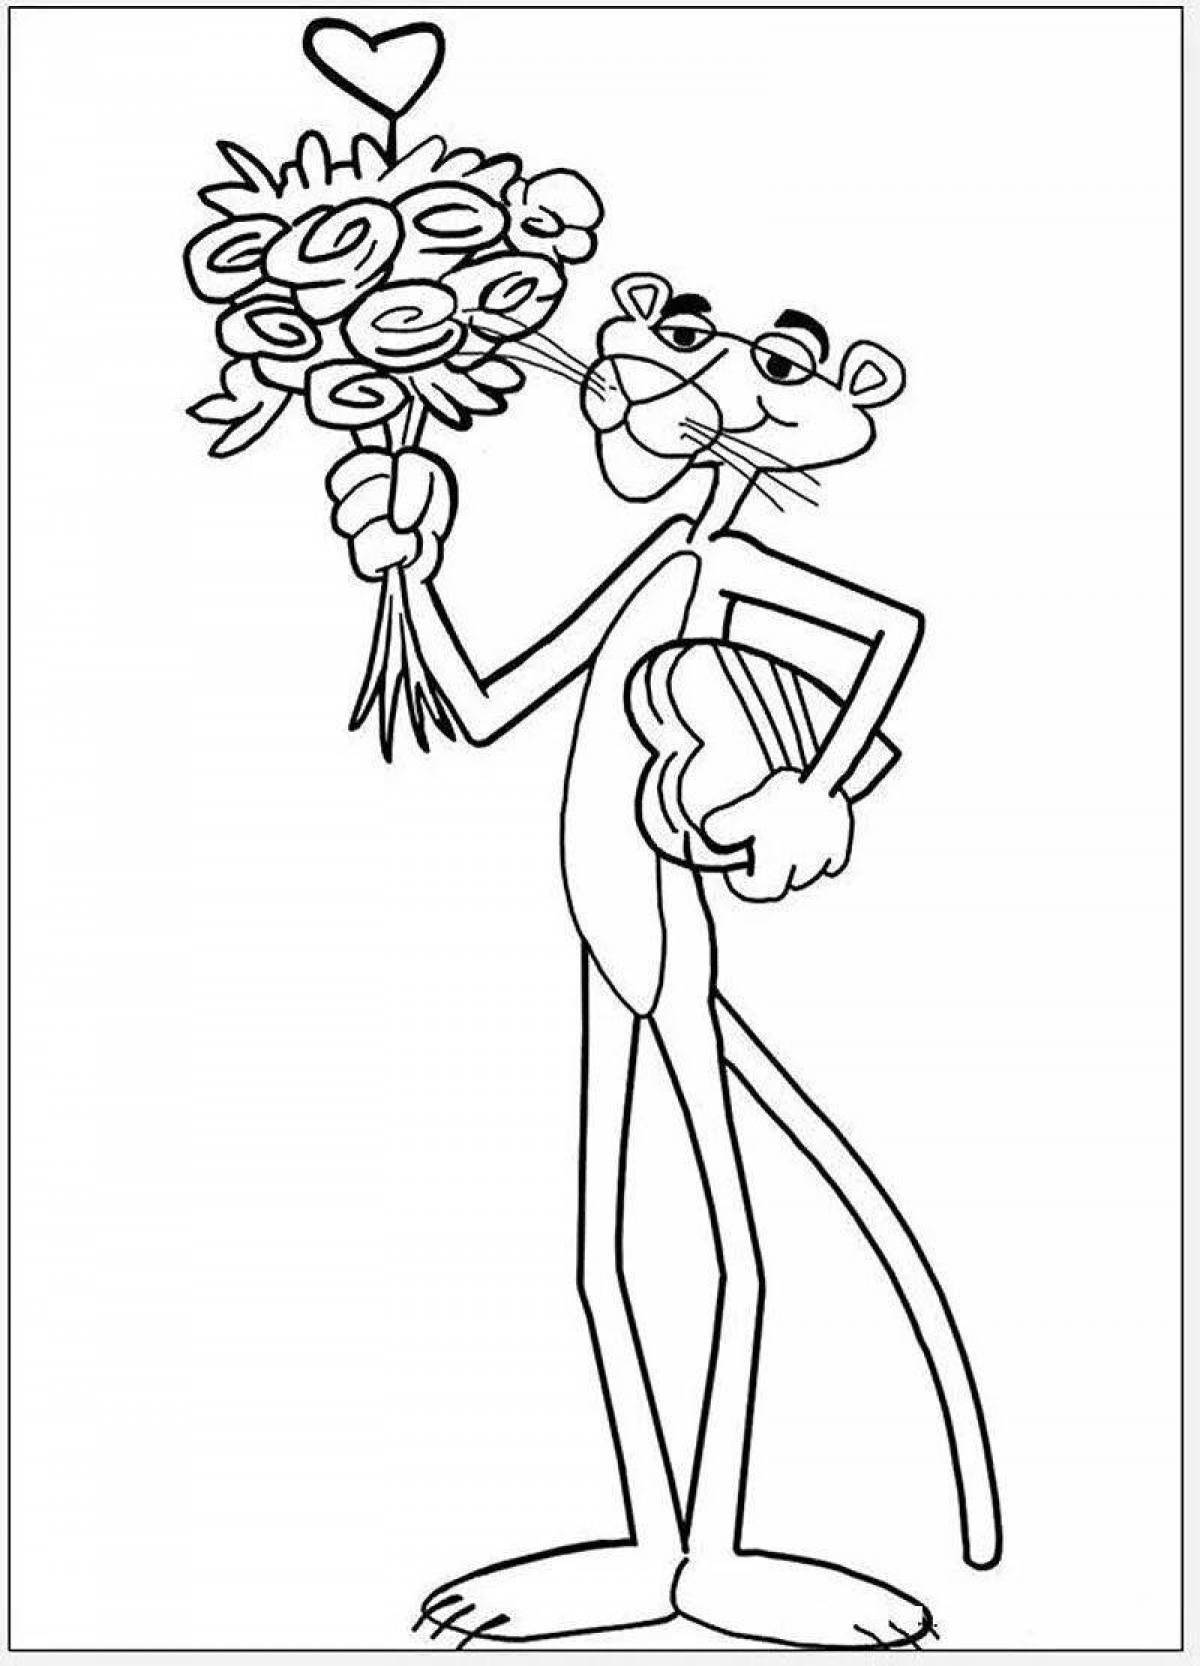 Glittering pink panther coloring page